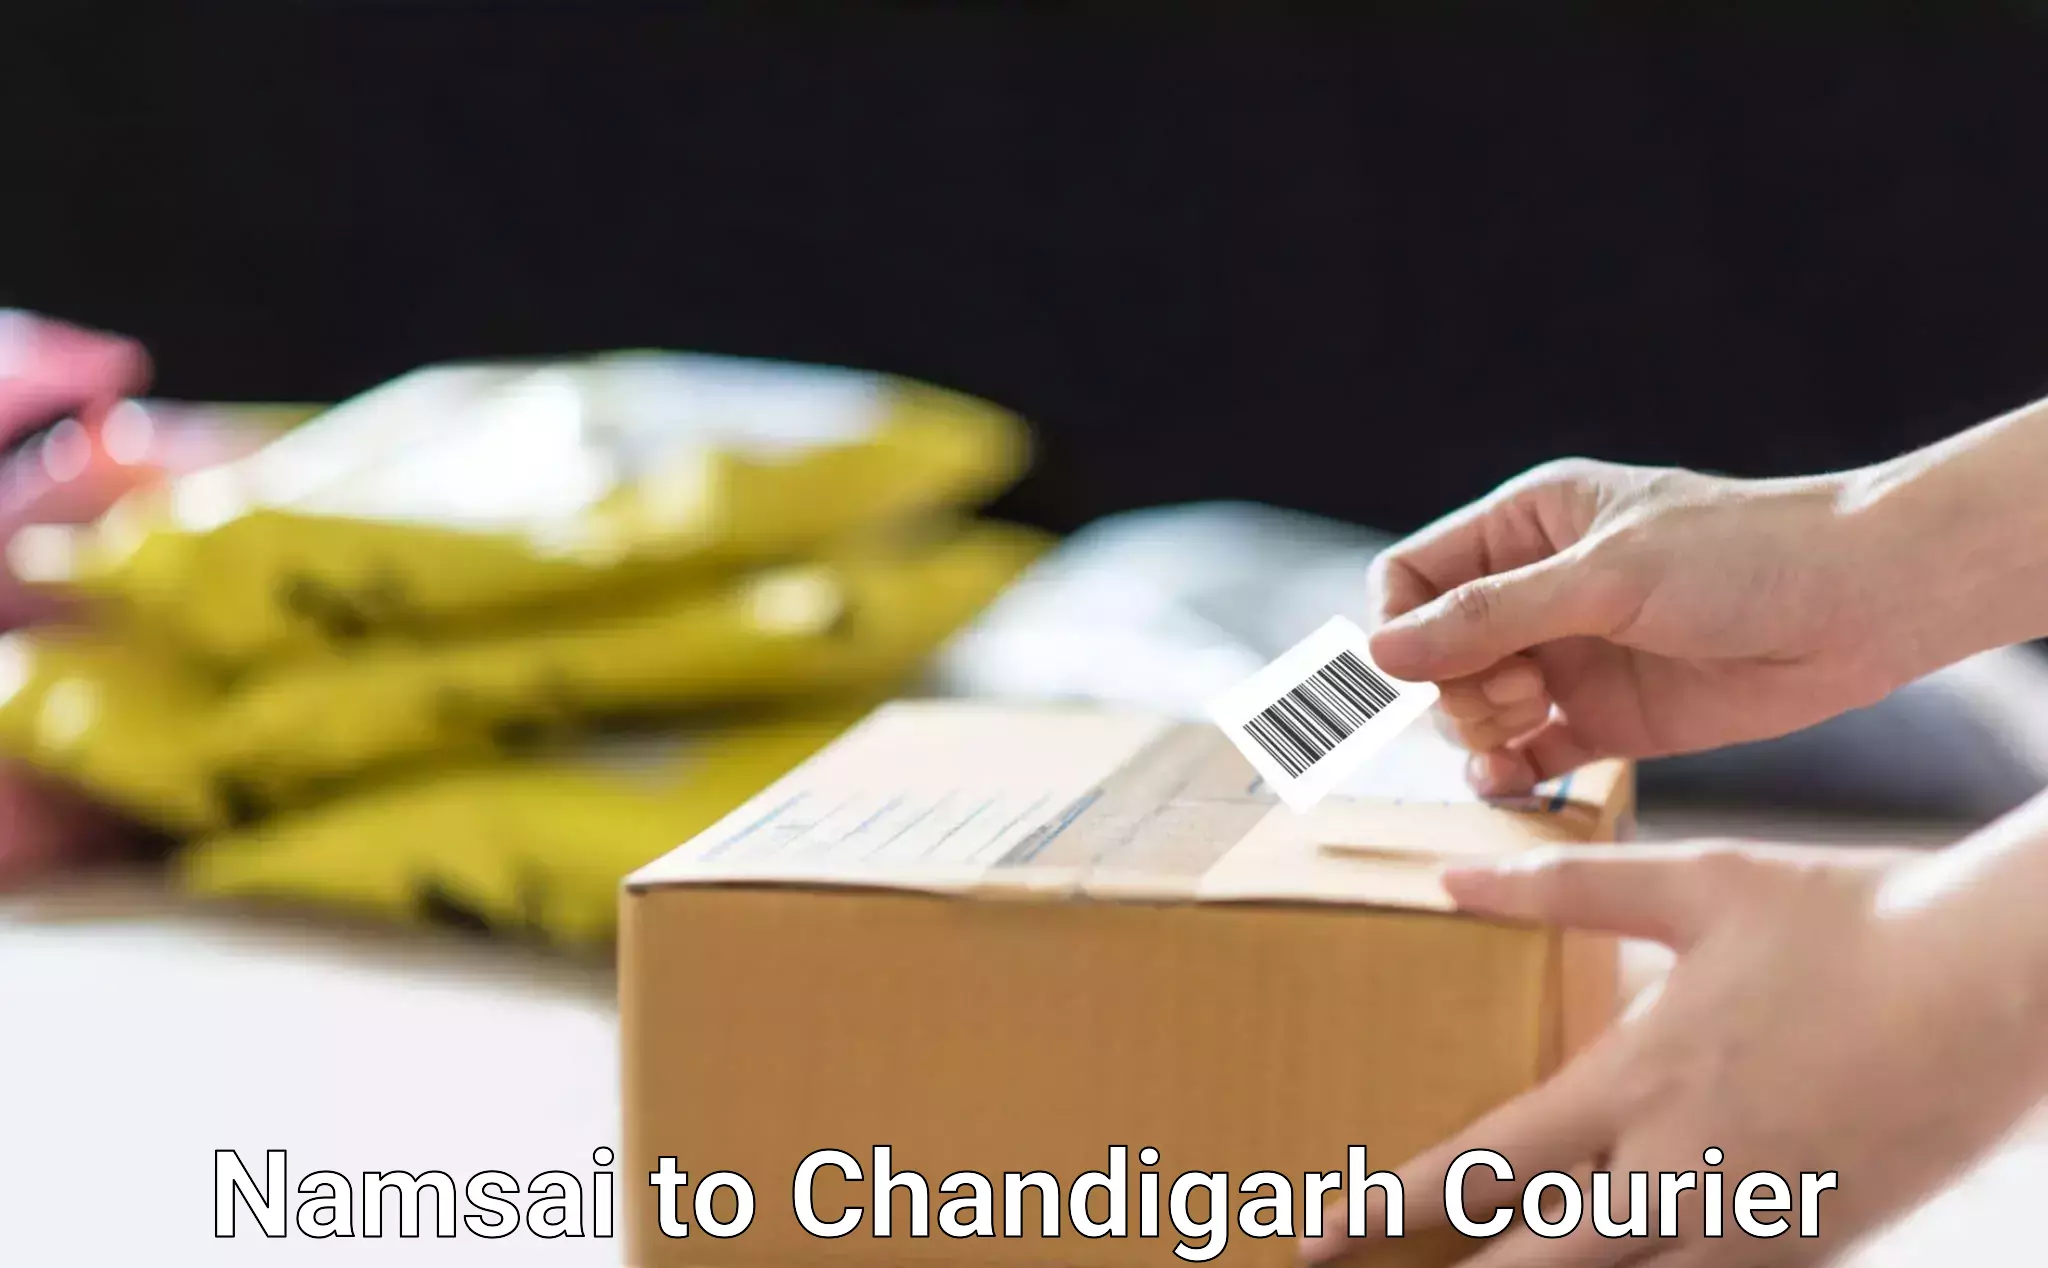 Parcel service for businesses Namsai to Chandigarh